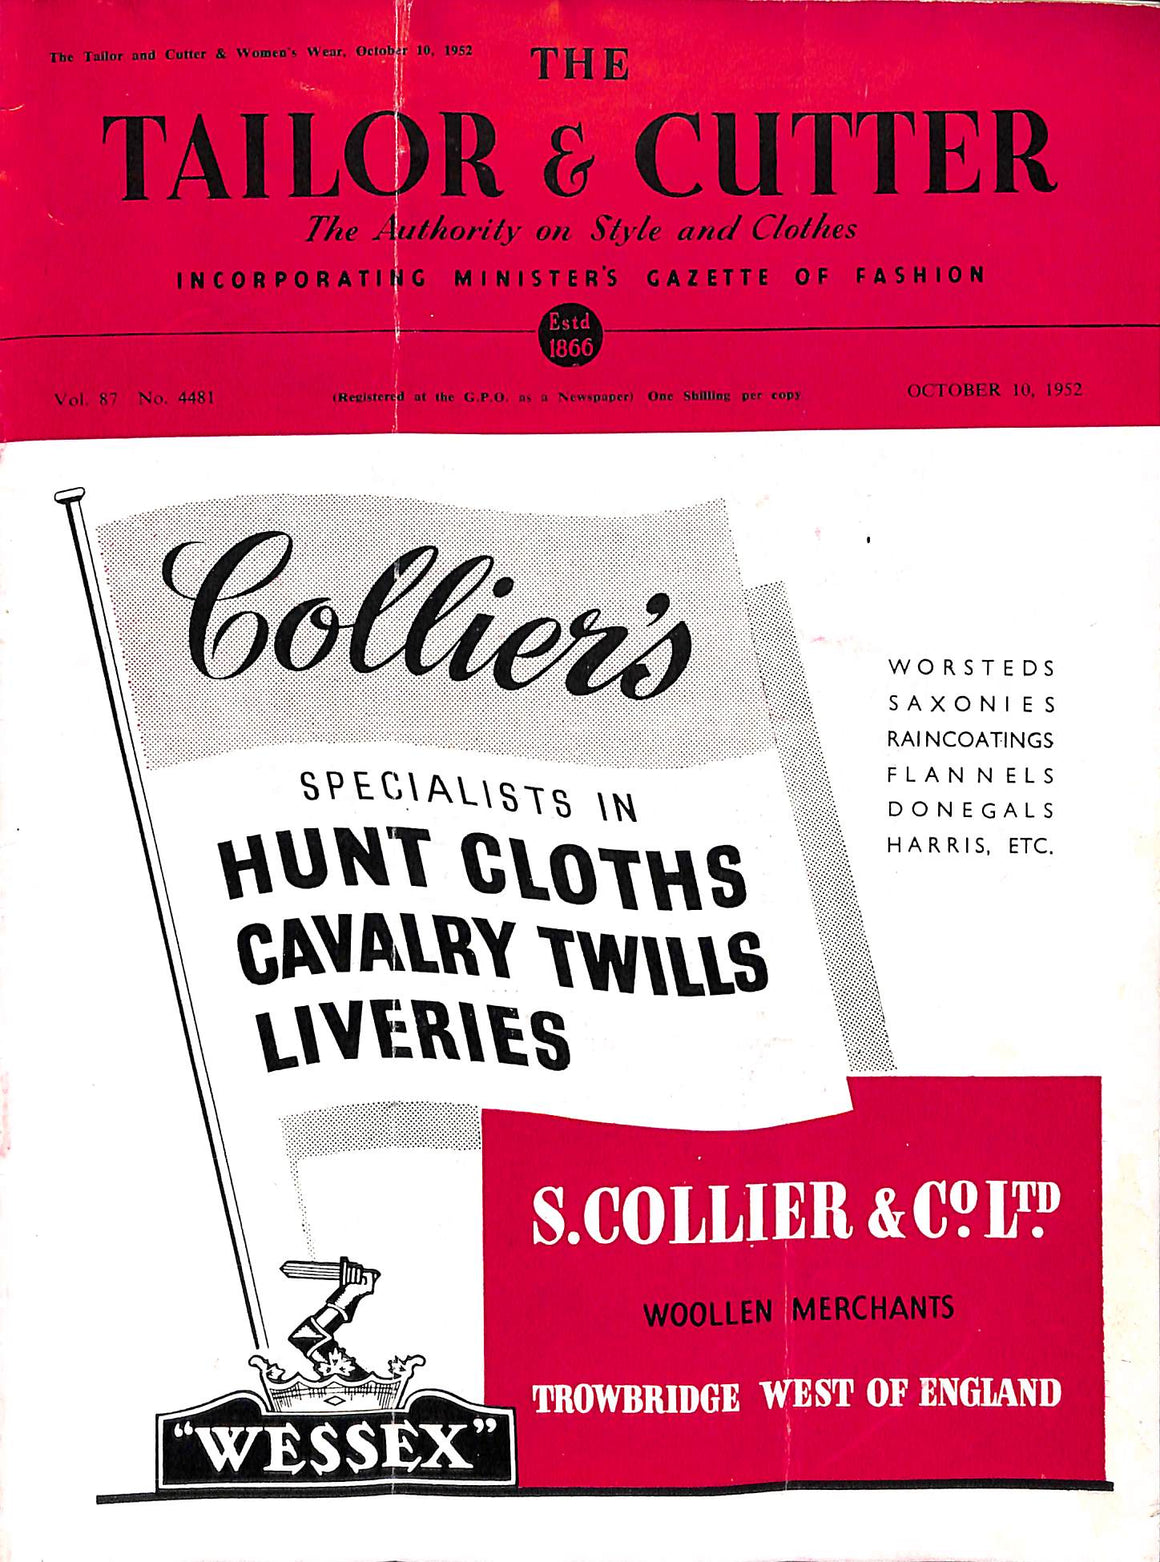 The Tailor & Cutter The Authority On Style And Clothes: October 10, 1952